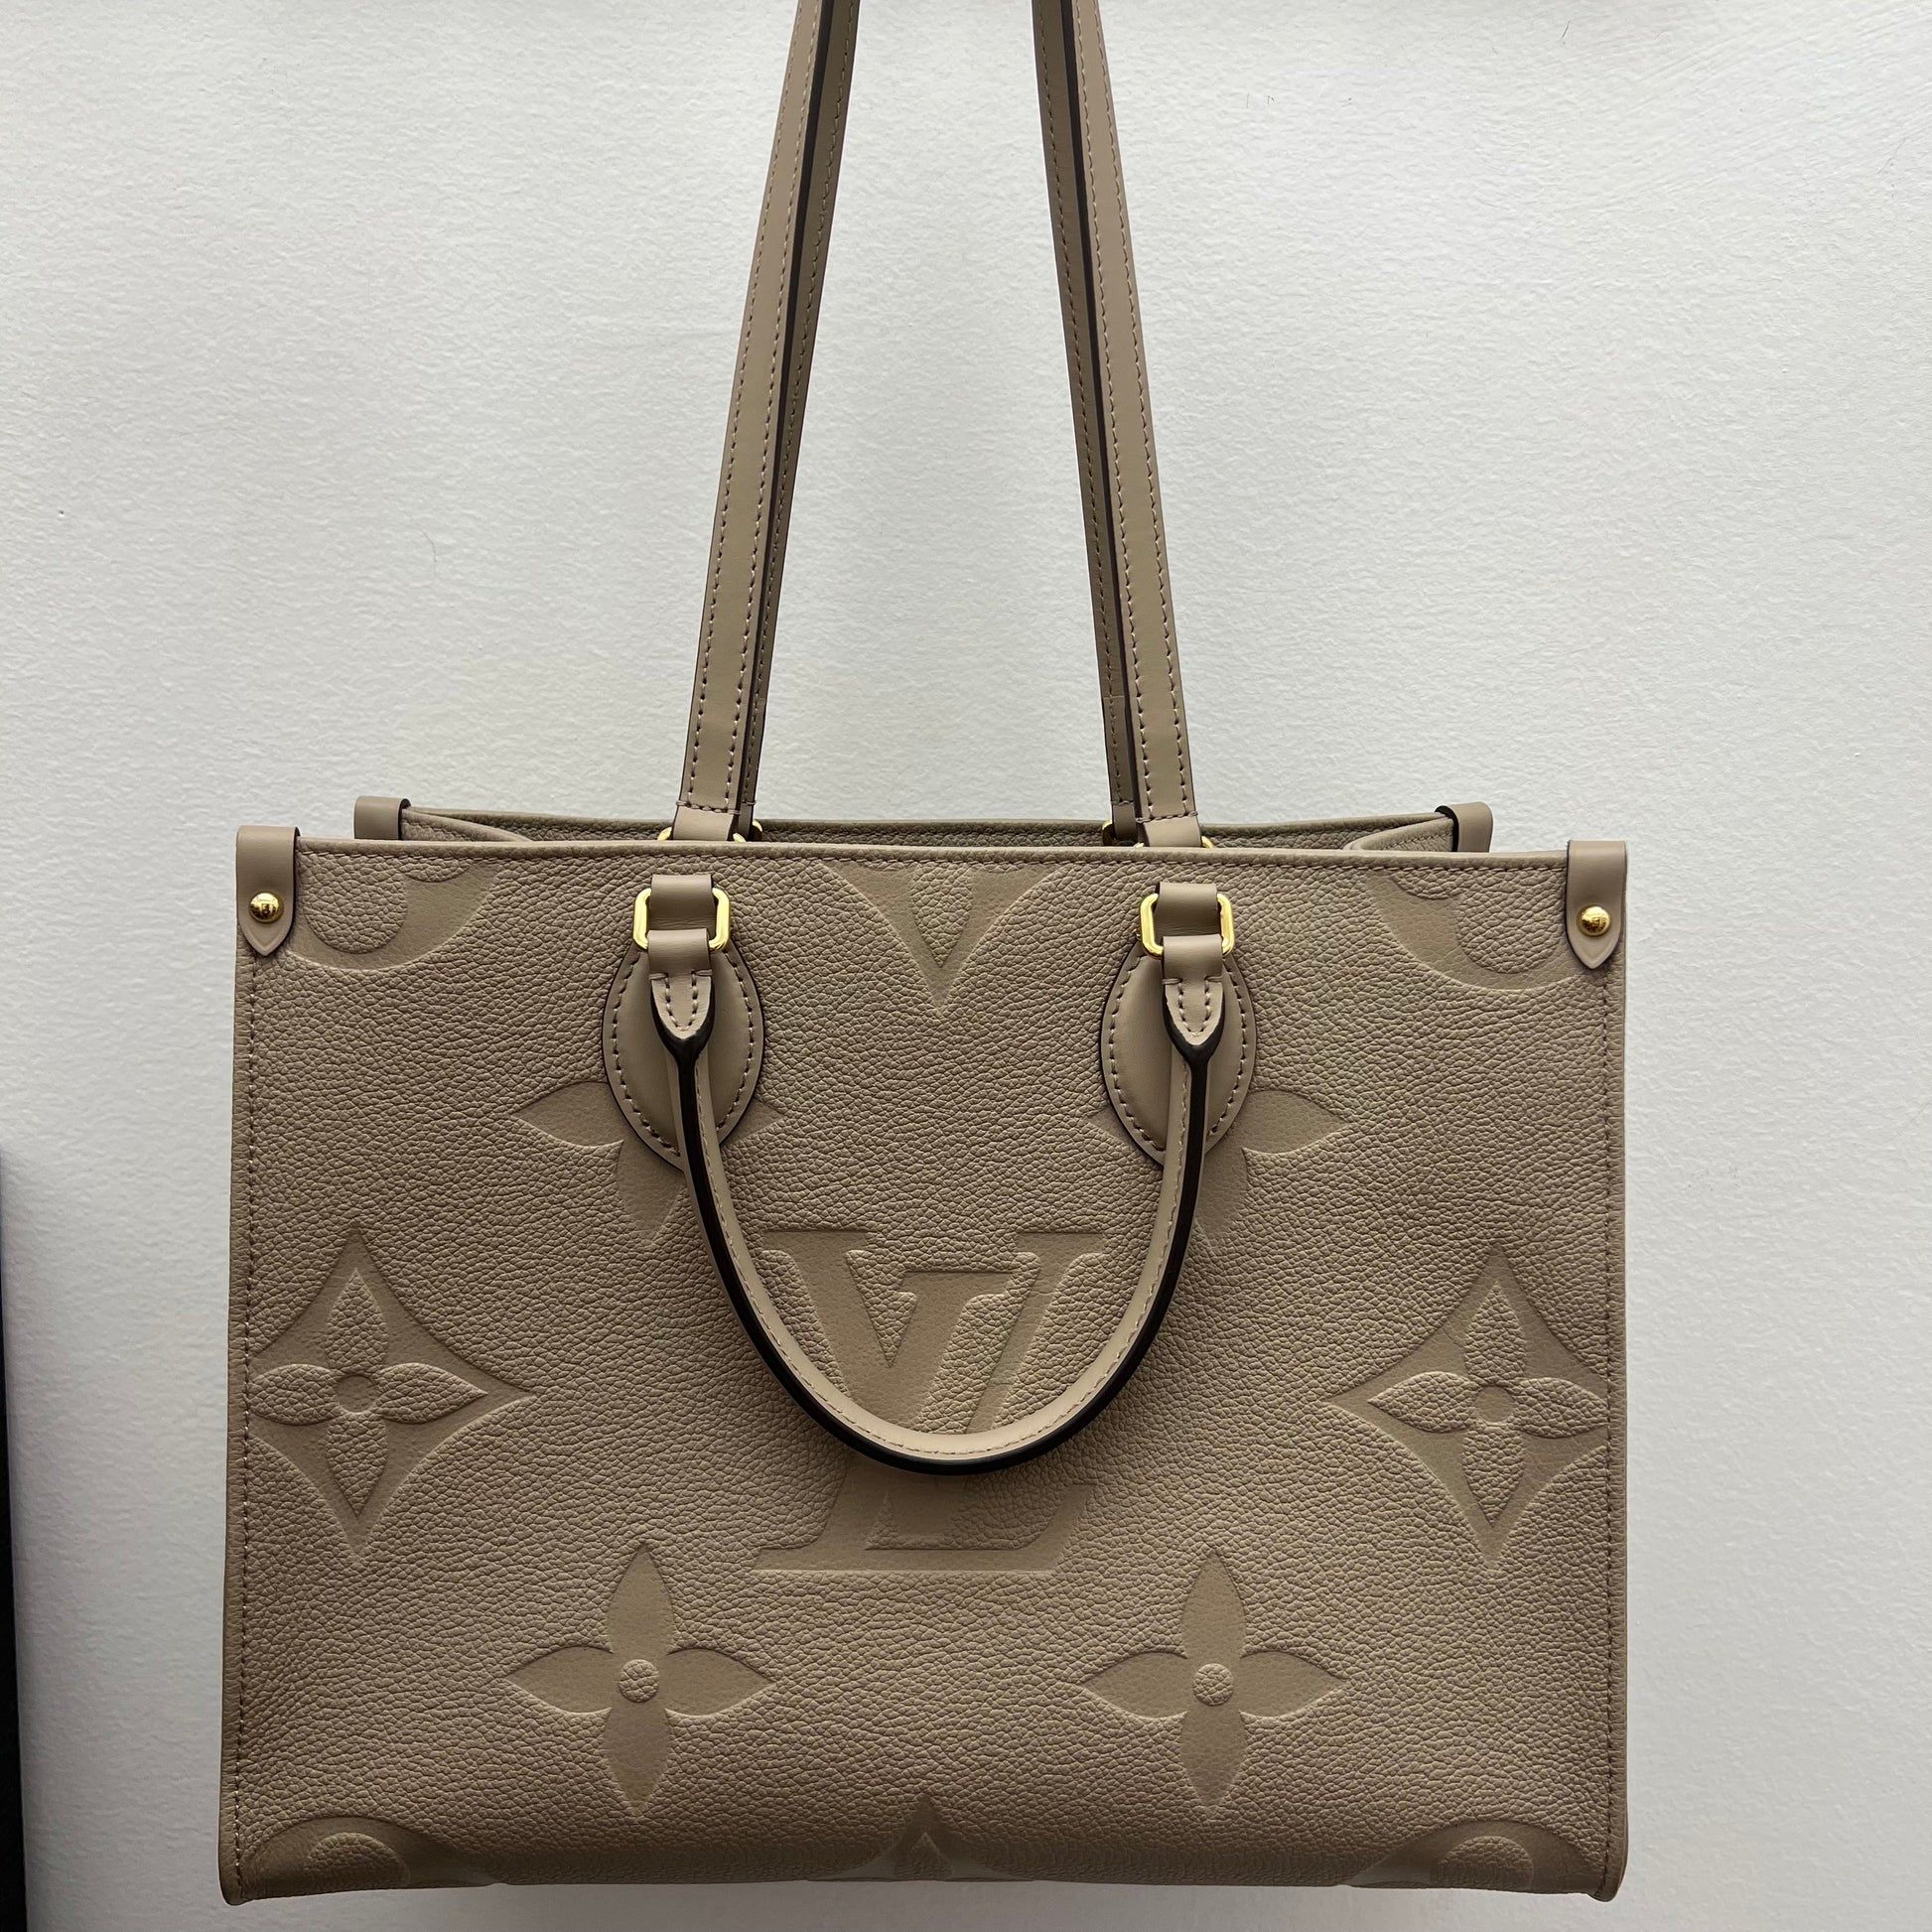 Louis Vuitton on The Go PM(Turtle Claim)